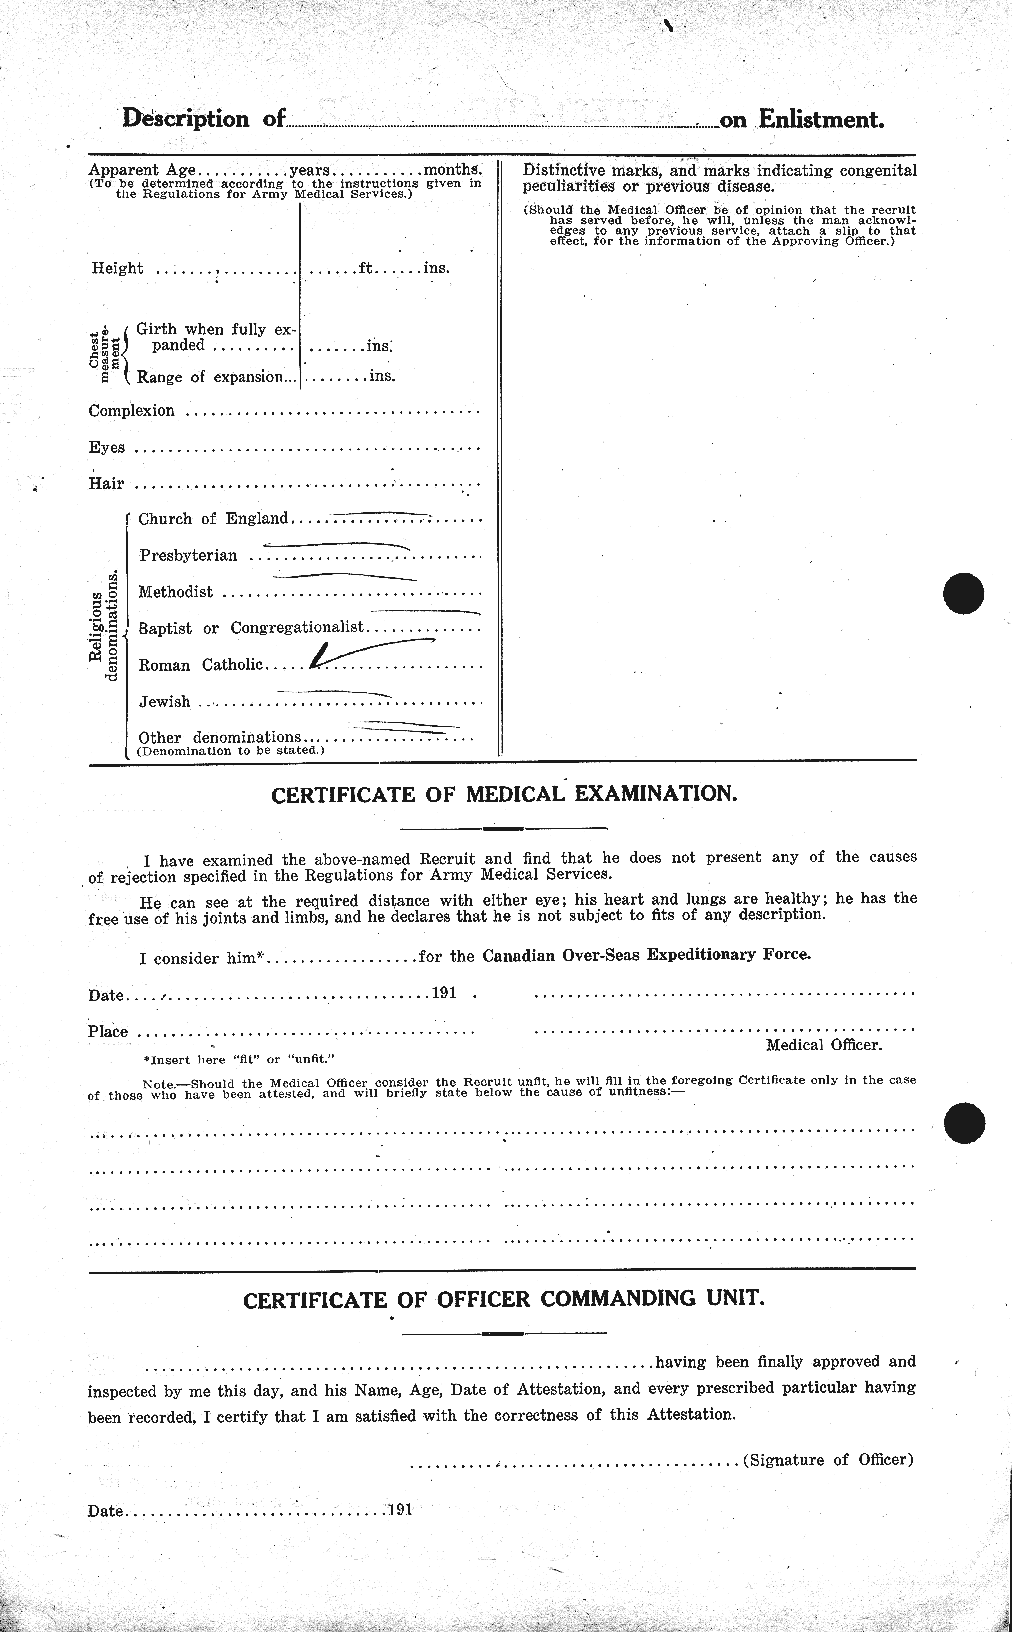 Personnel Records of the First World War - CEF 575559b